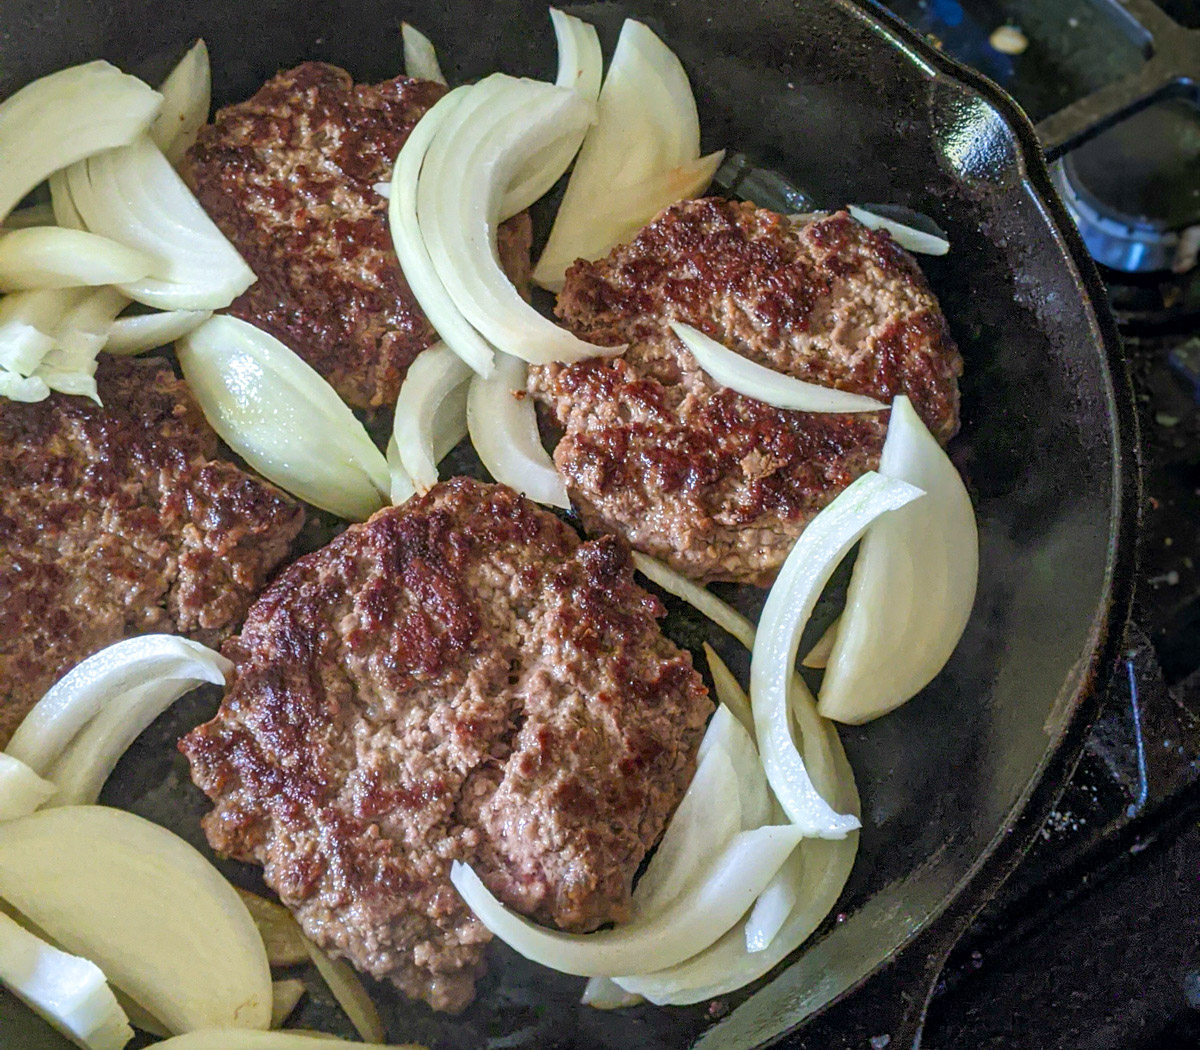 Burgers frying in a cast iron skillet with raw onions added around them to cook.